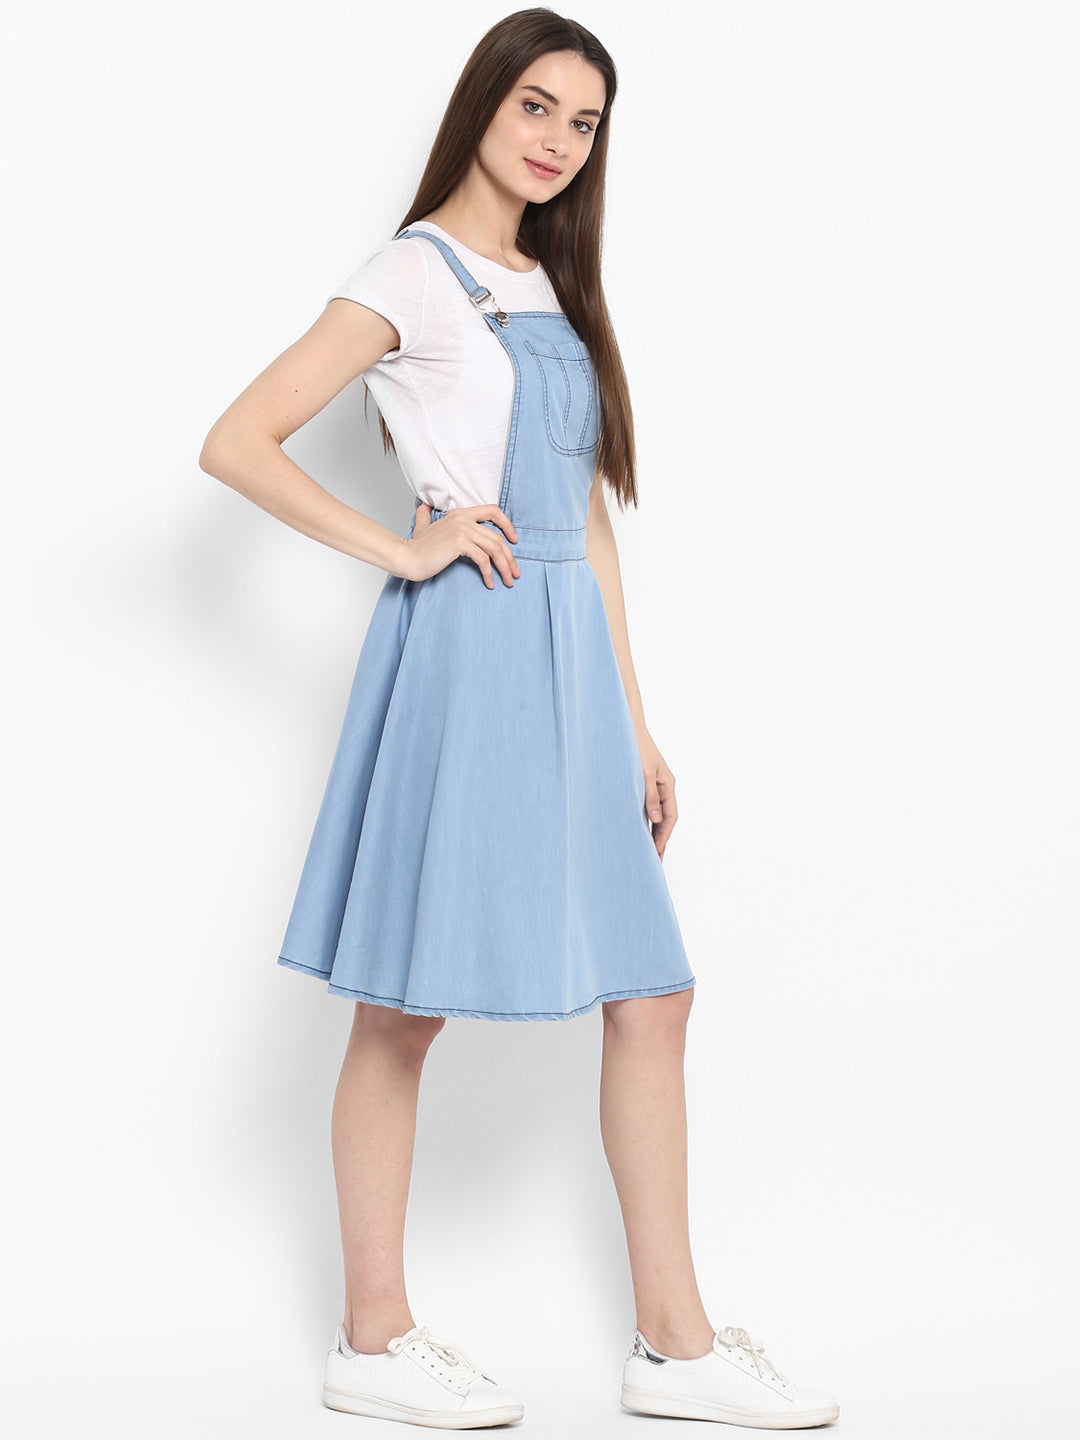 Buy Buynewtrend Cotton Lycra Dungaree Skirt with Top for Women (Small,  Gajri) at Amazon.in